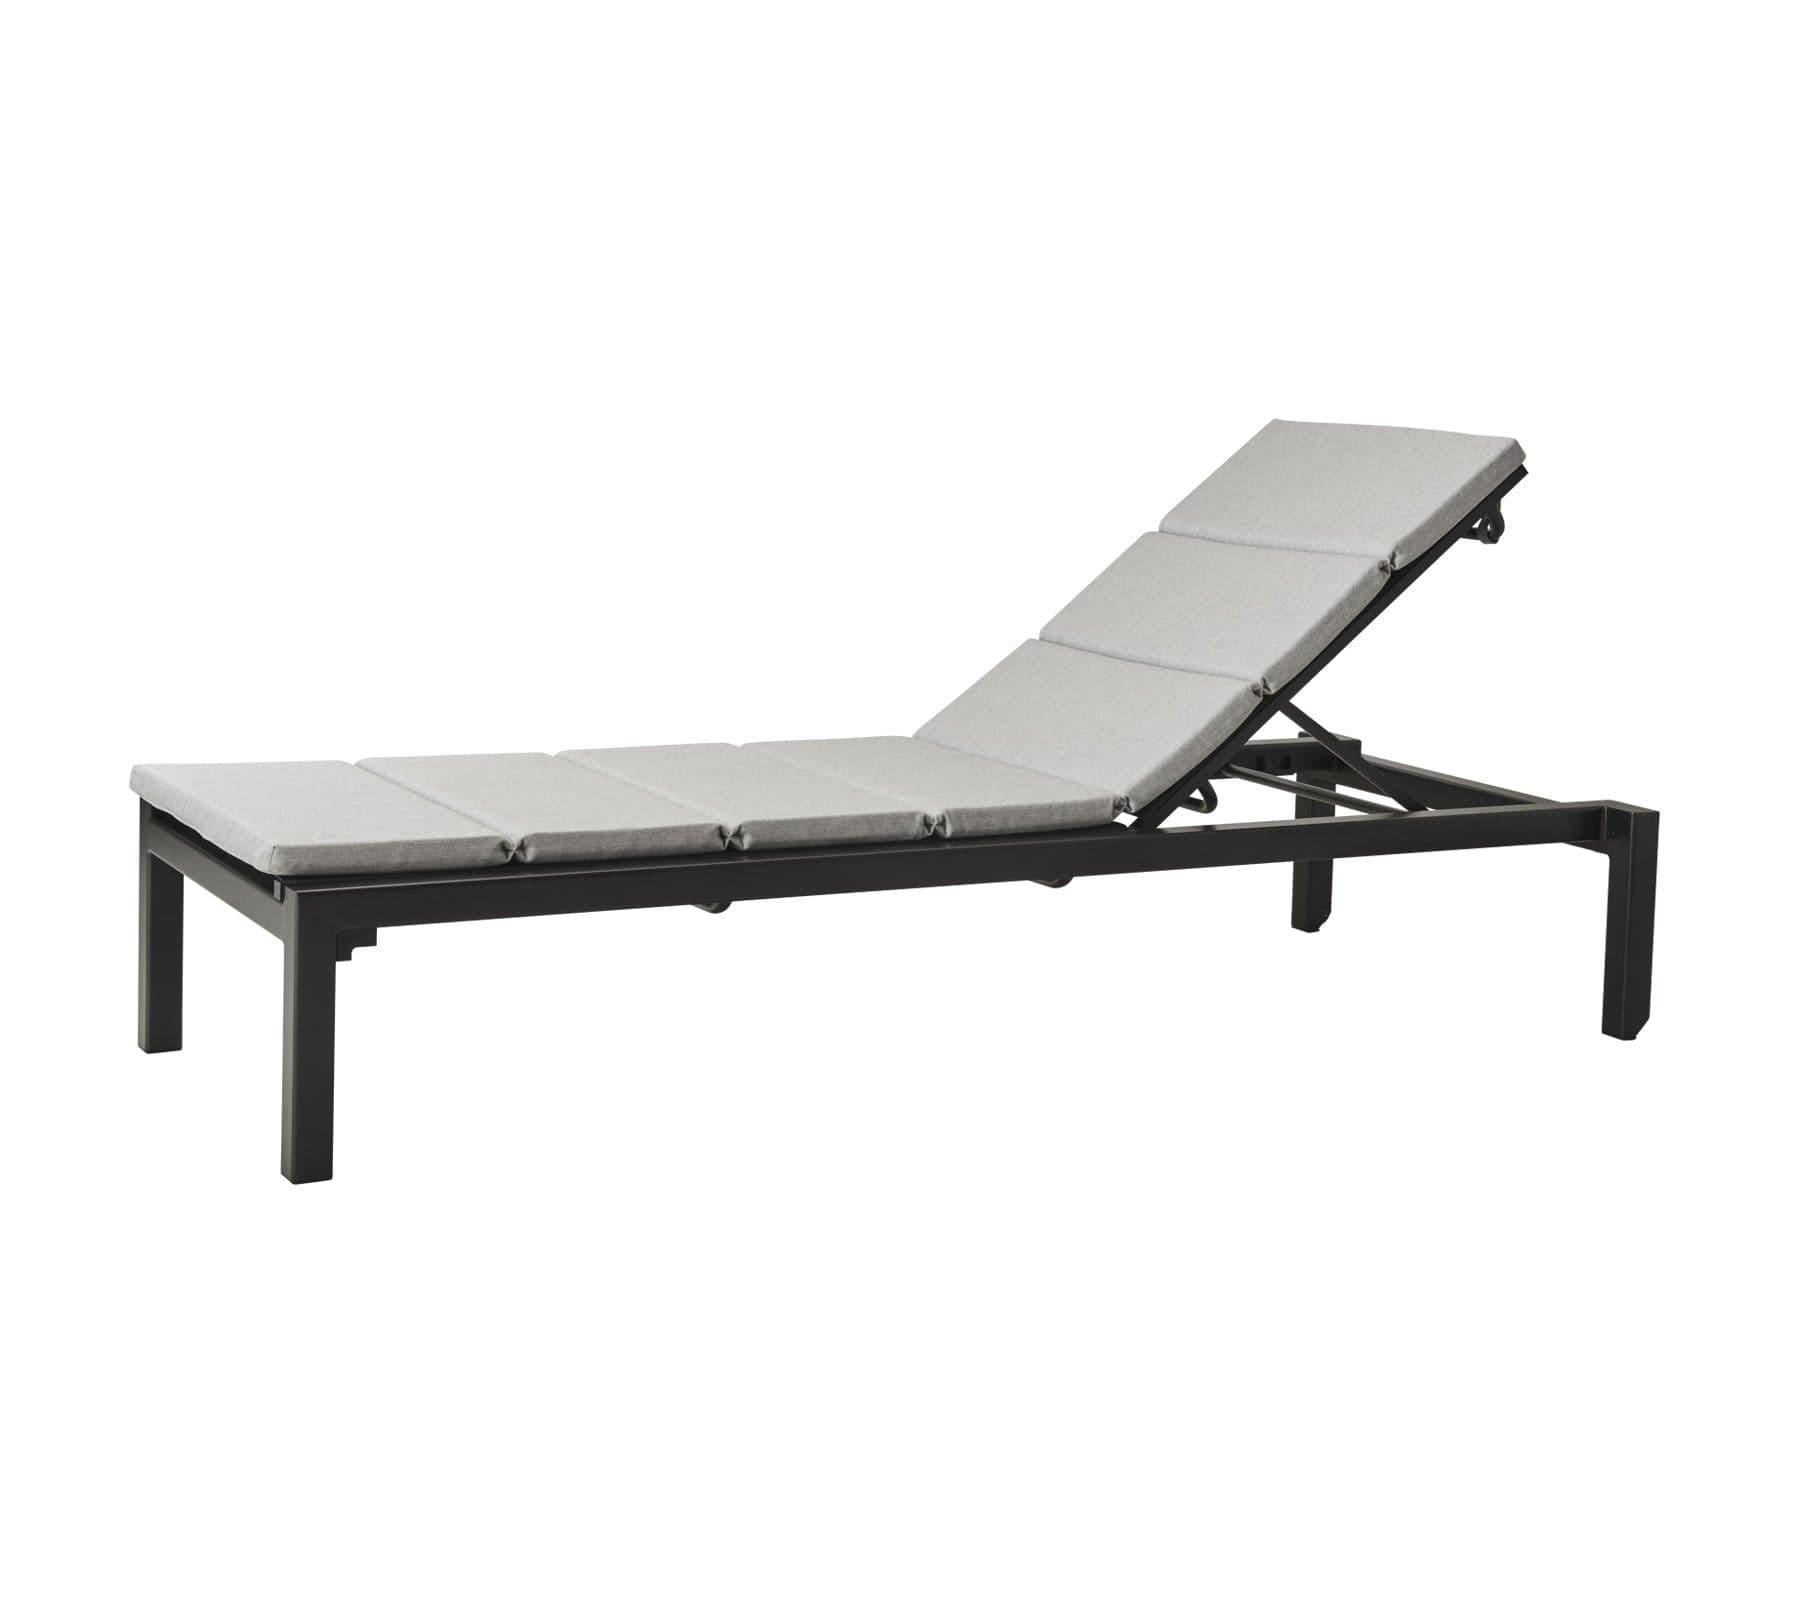 Boxhill's Relax dark grey outdoor chaise lounge with light grey cushion on white background